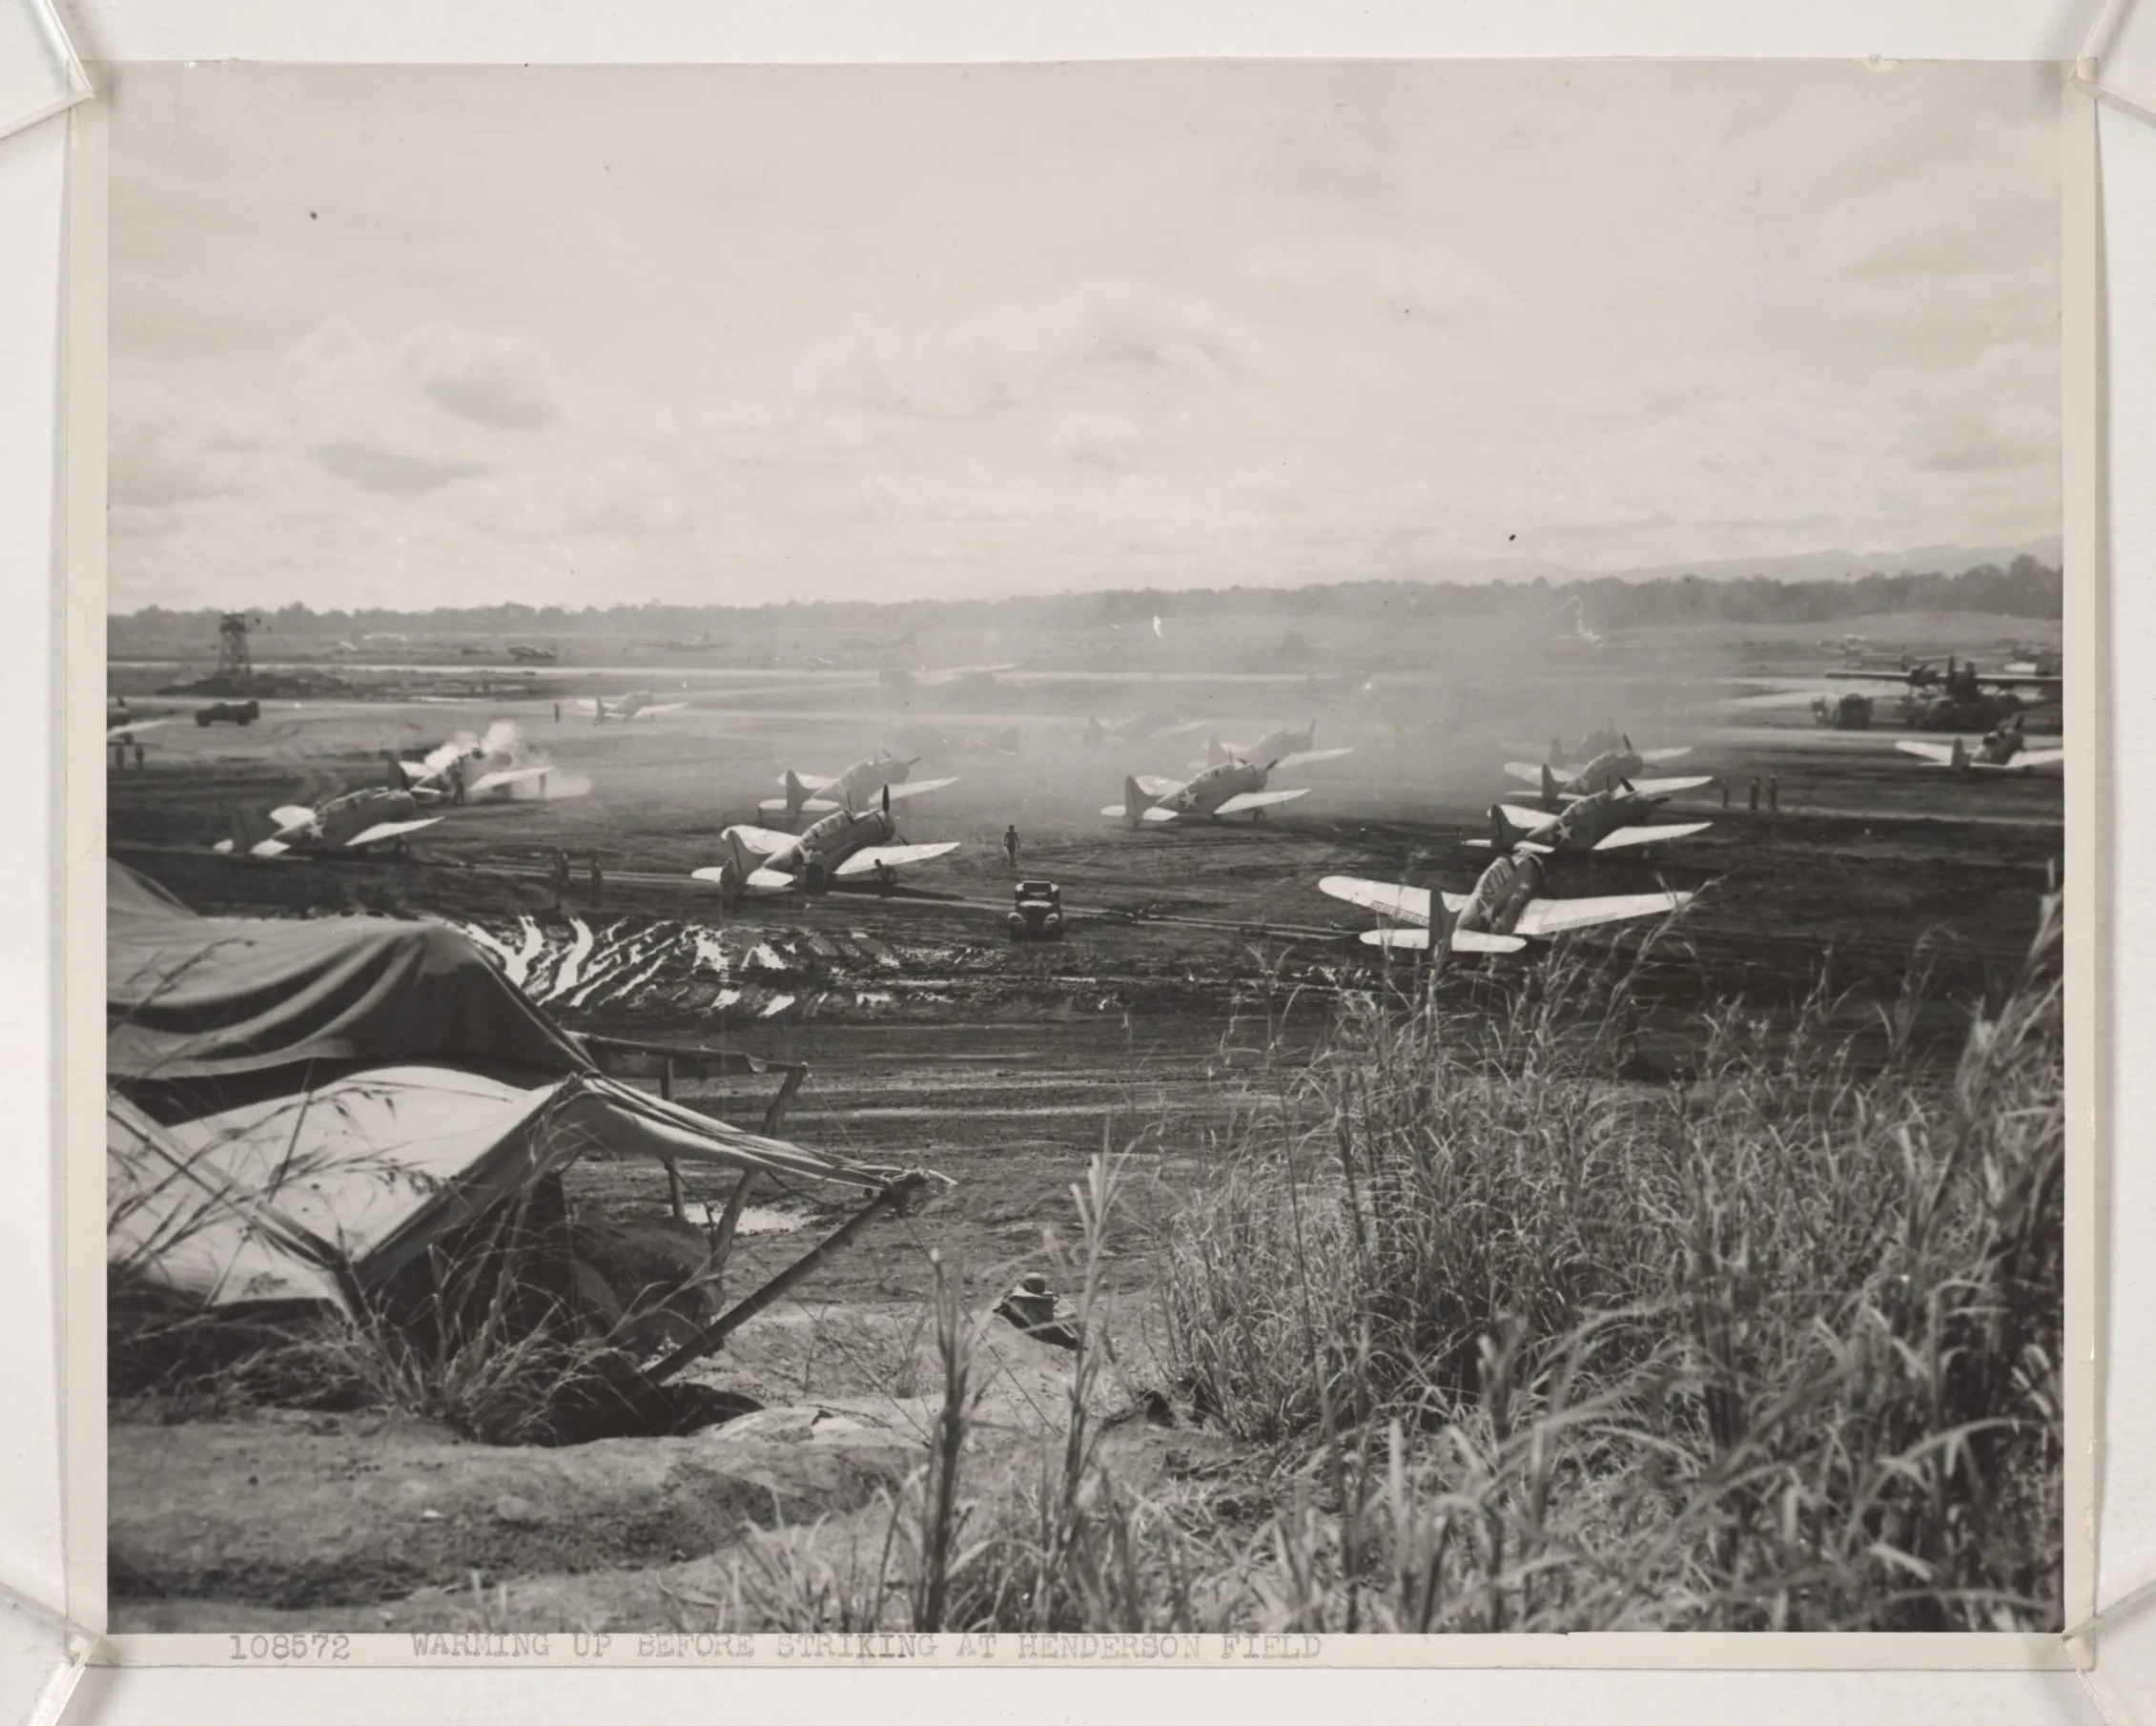 Guadalcanal, December 10, 1942. Marine SBD Squadron warms up before strike at Henderson Field during December, 1942.